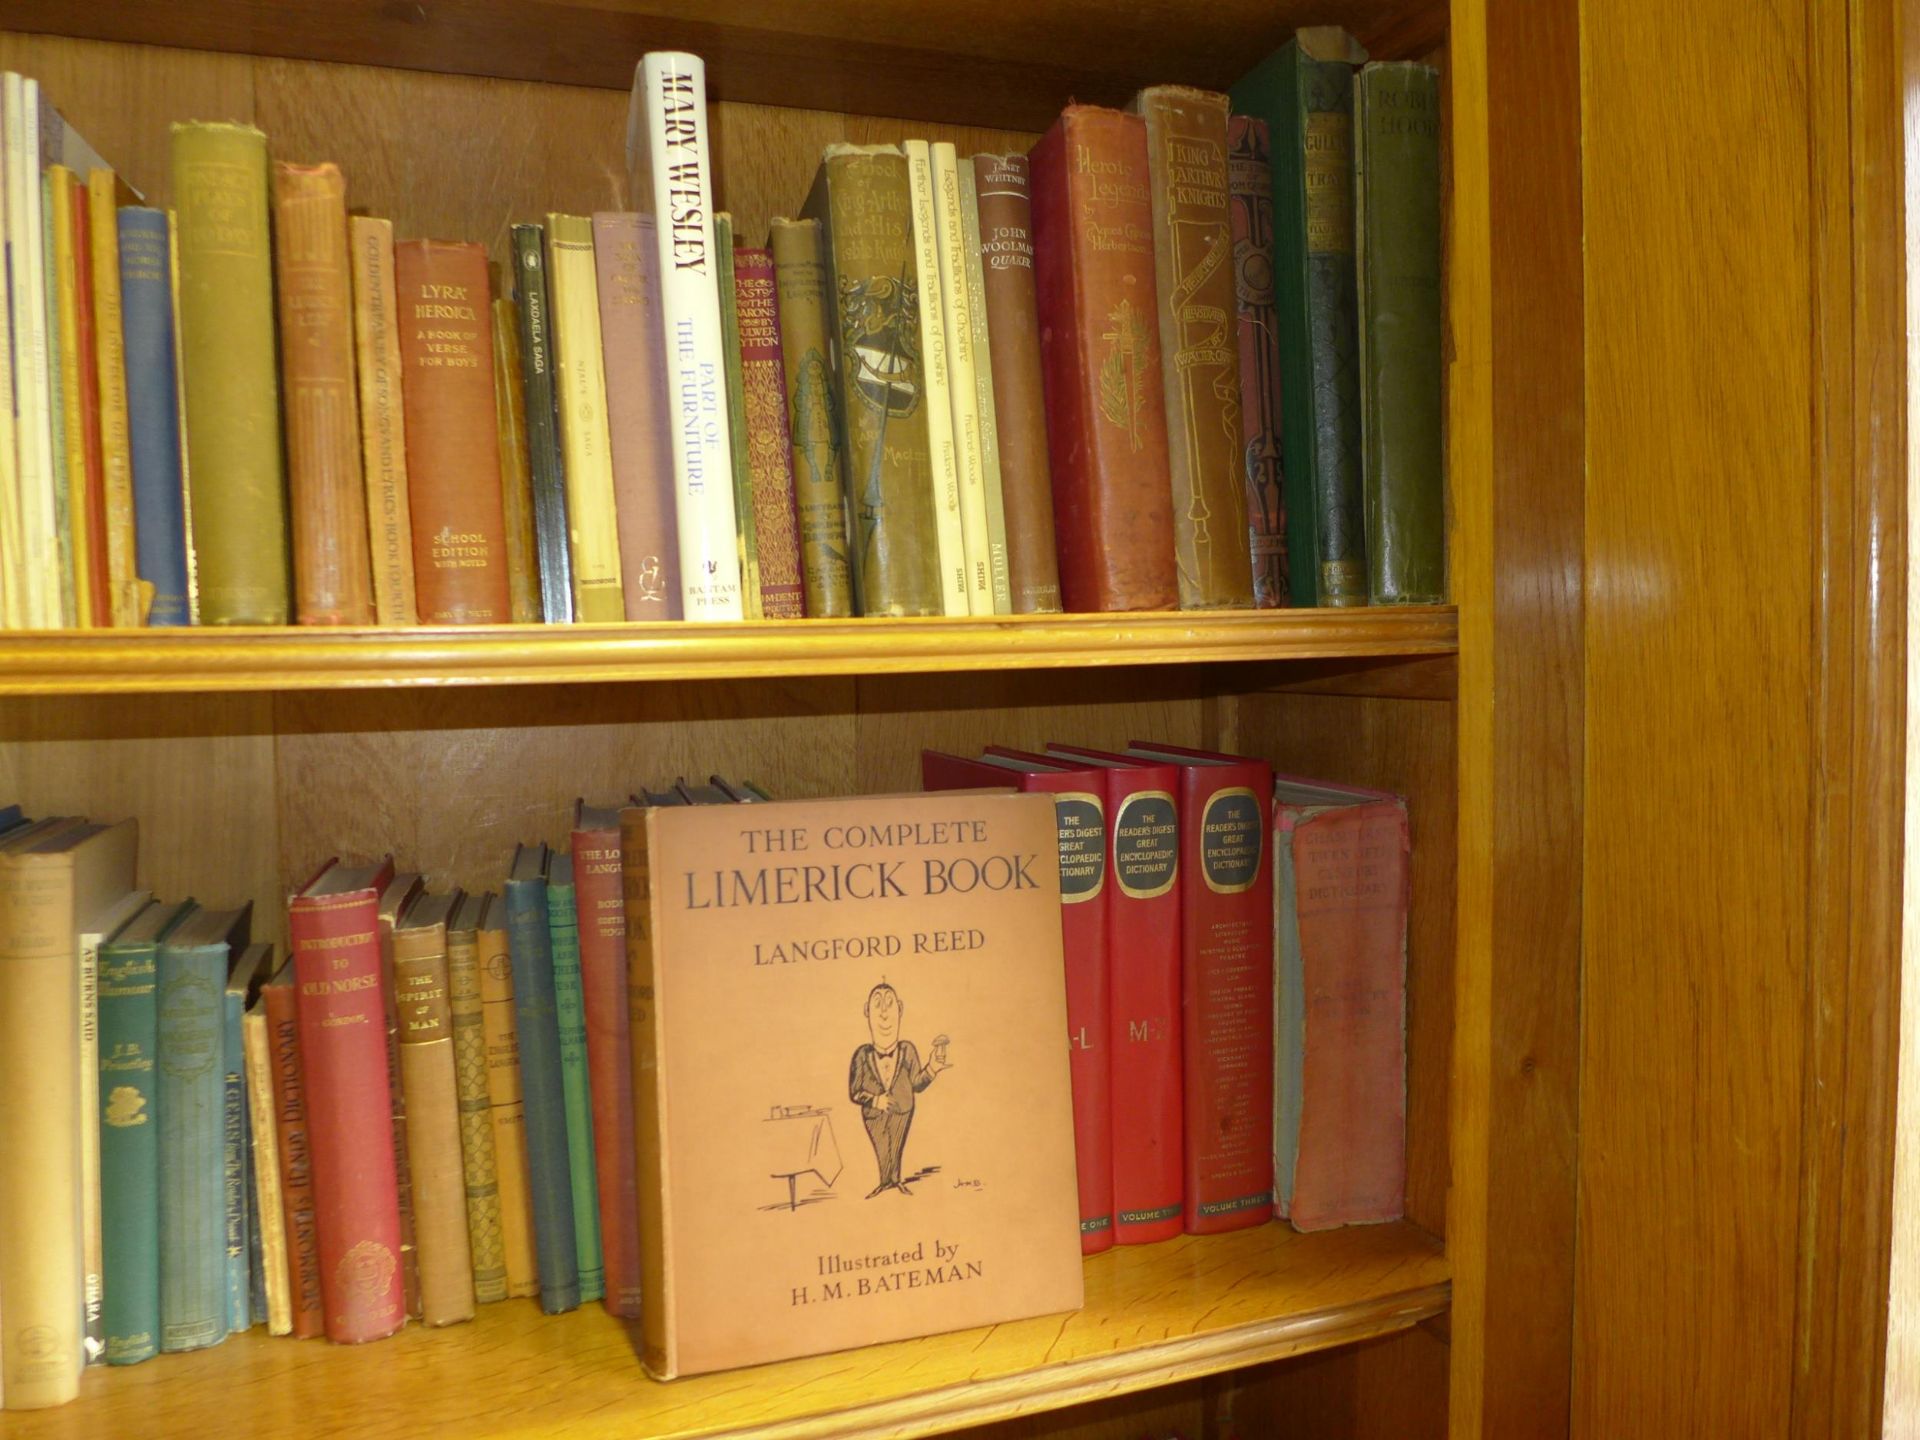 EIGHTY TWO BOOKS TO INCLUDE THE COMPLETE LIMERICK BOOK BY LANGFORD REED, POETRY, NORSE MYTHS ETC - Image 3 of 3